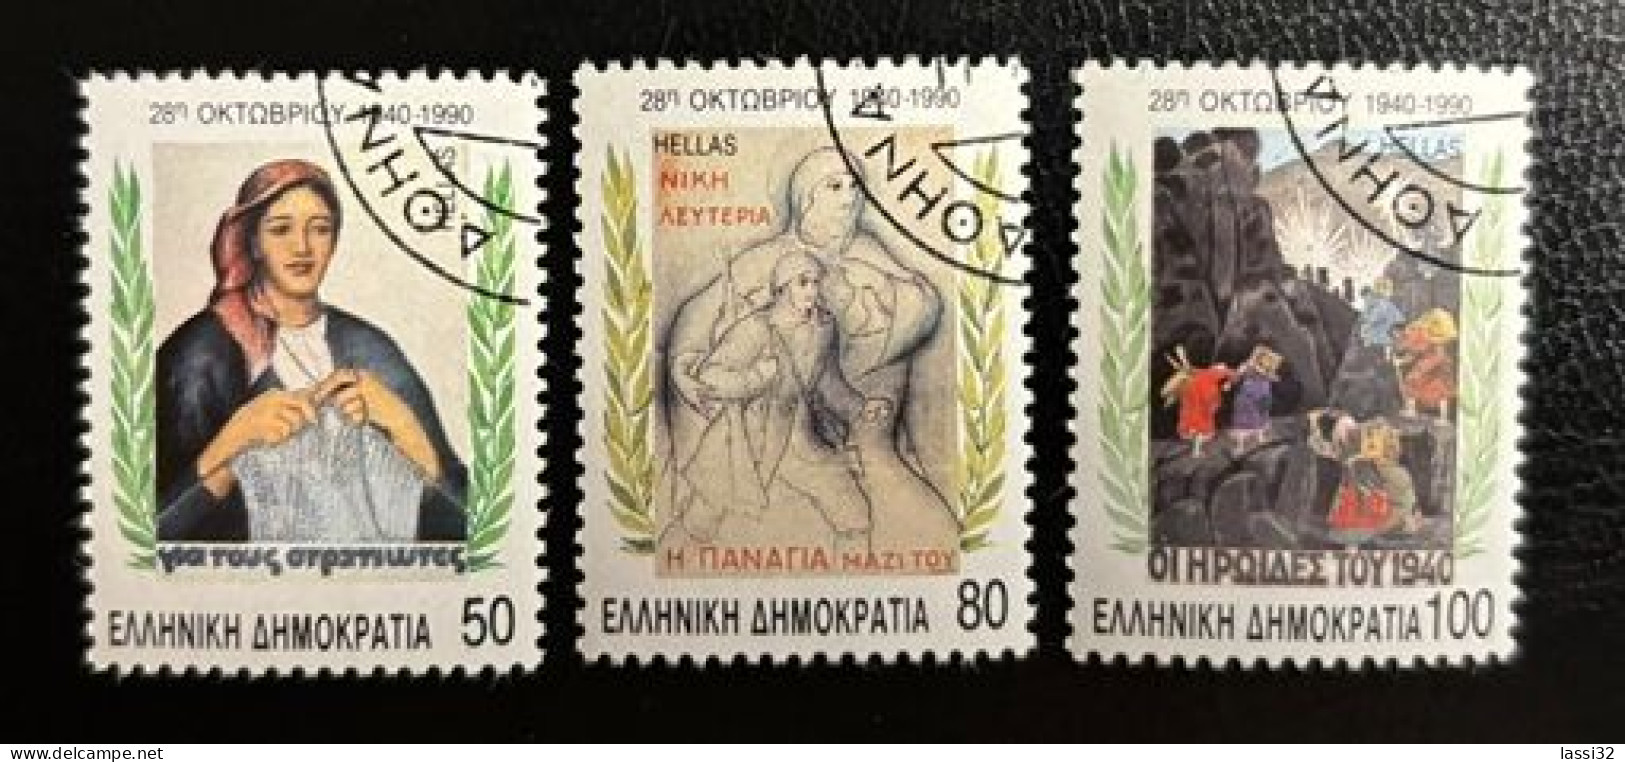 GREECE,1990. 50th ANNIVERSARY OF "NO" OCTOBER 28th 1940, USED - Used Stamps